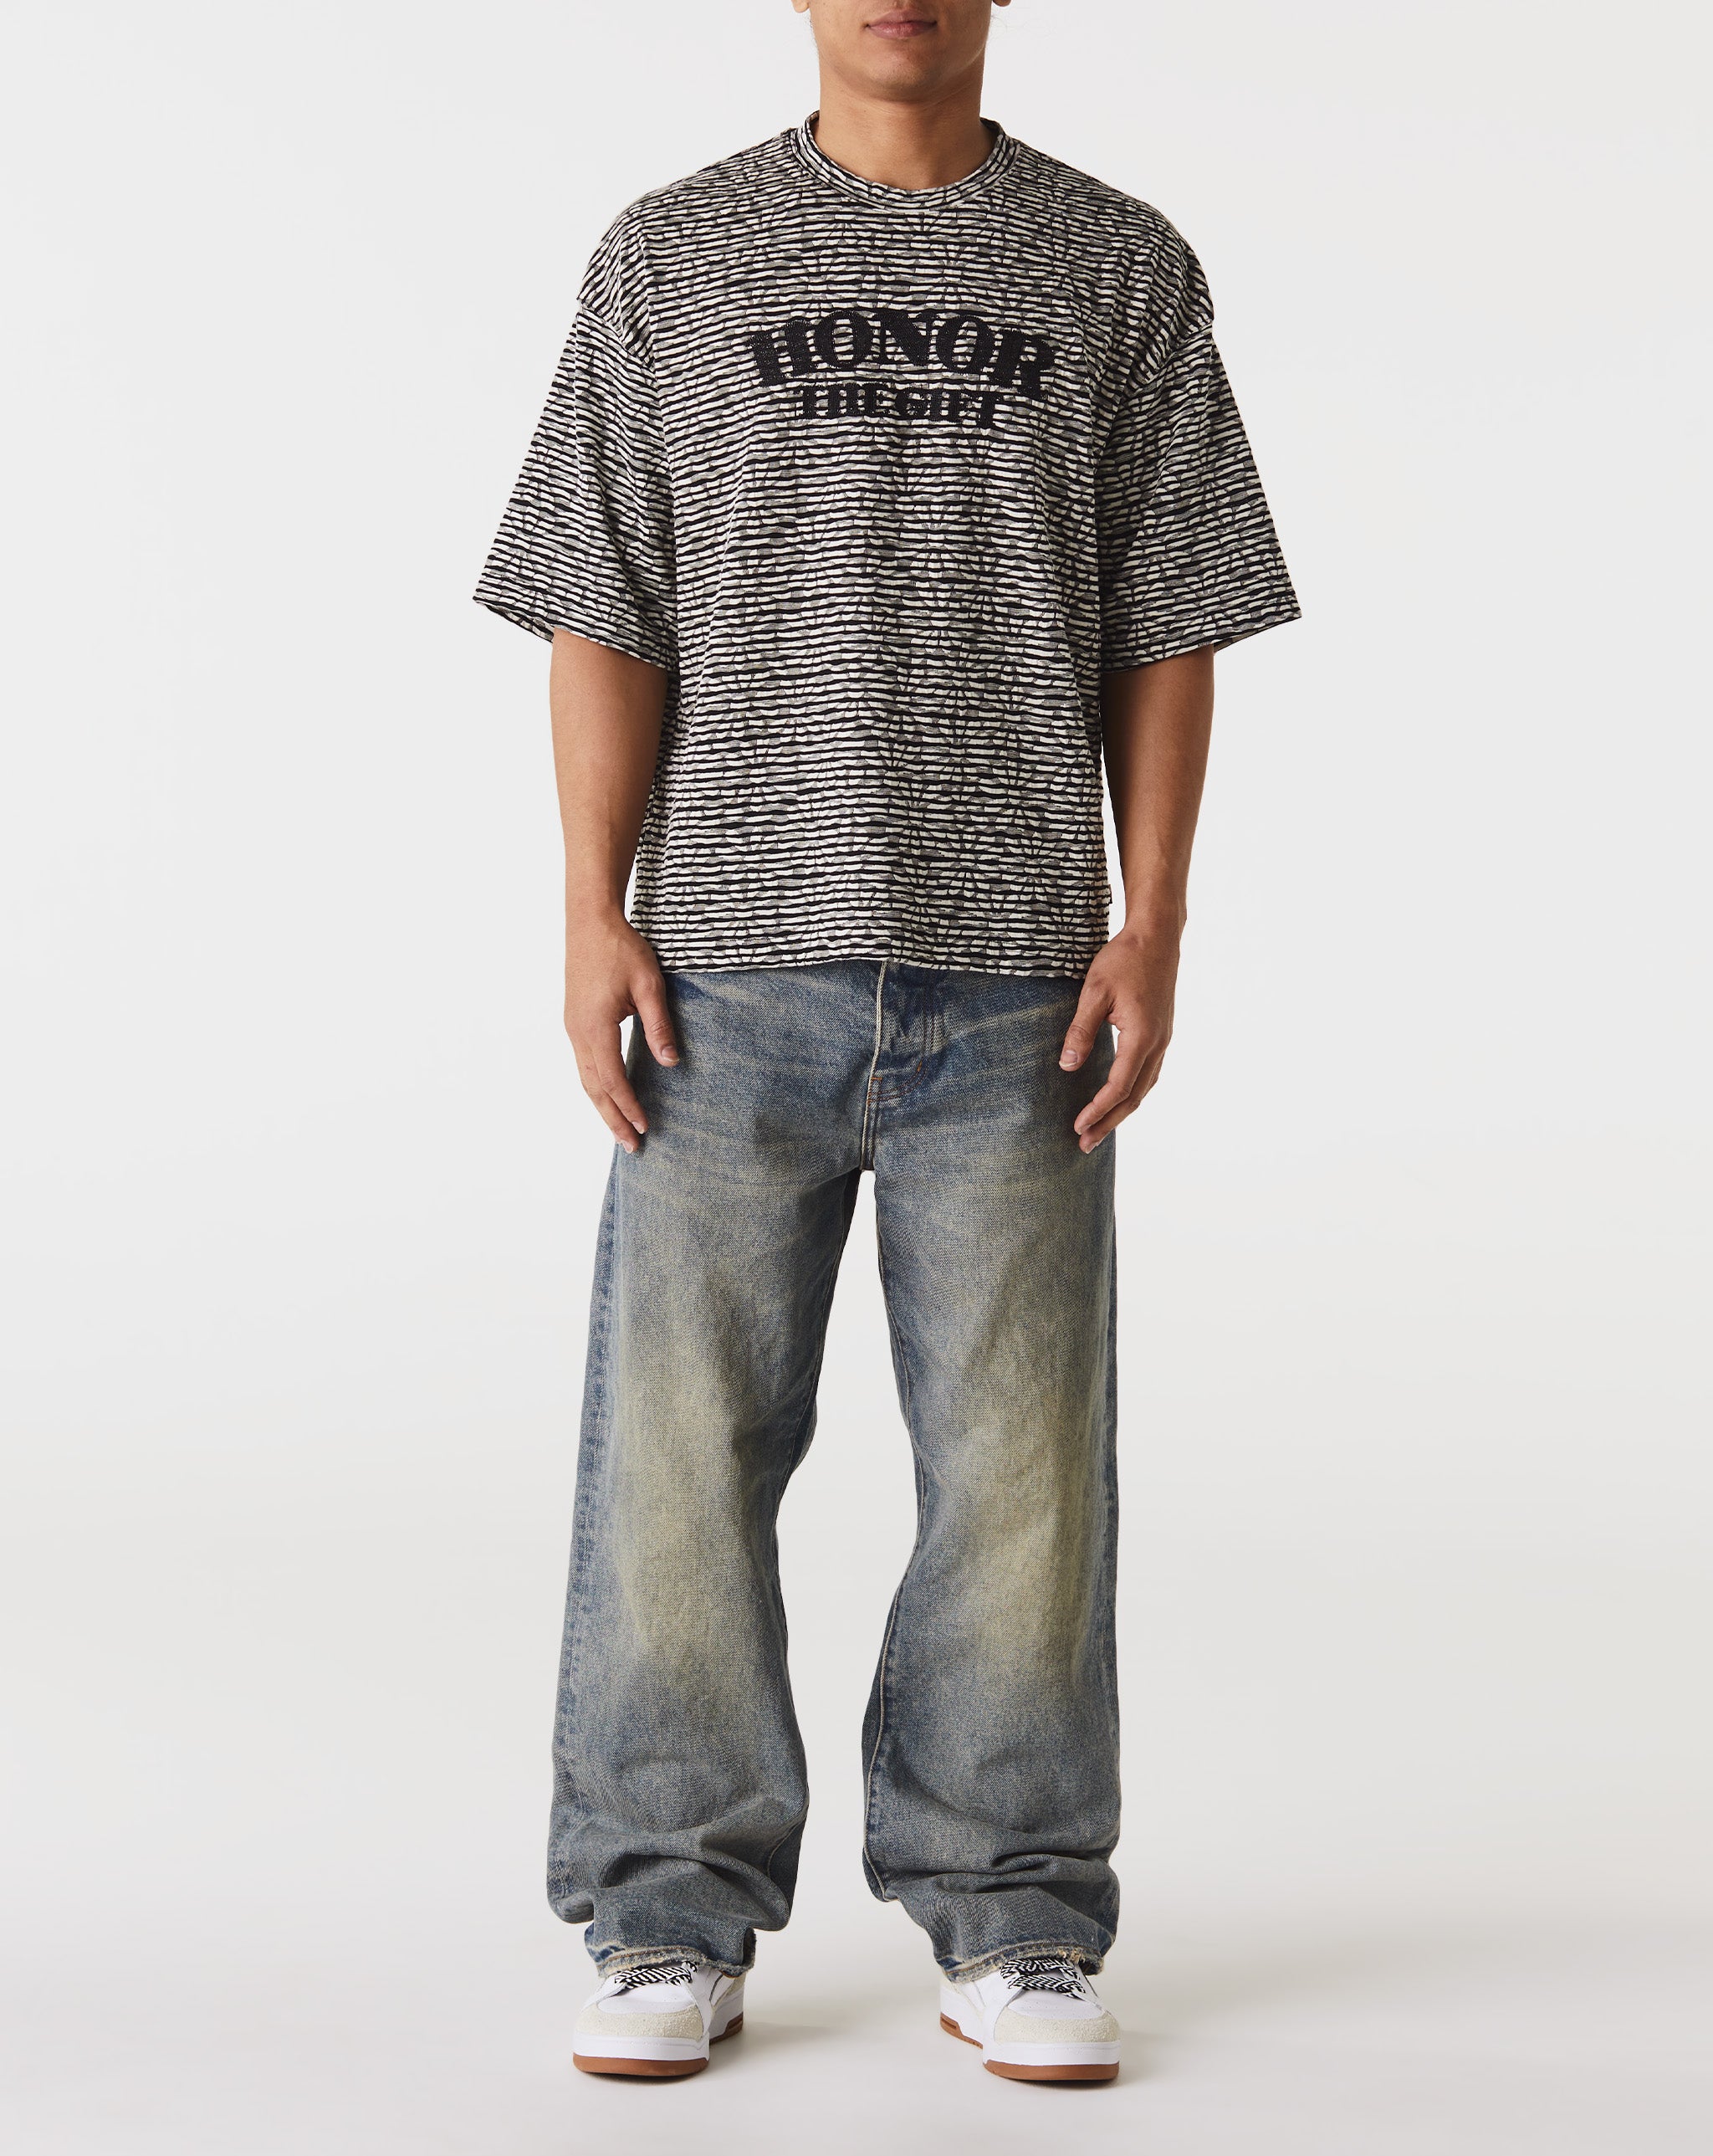 Honor The Gift Stripe Box T-Shirt - Rule of Next Apparel